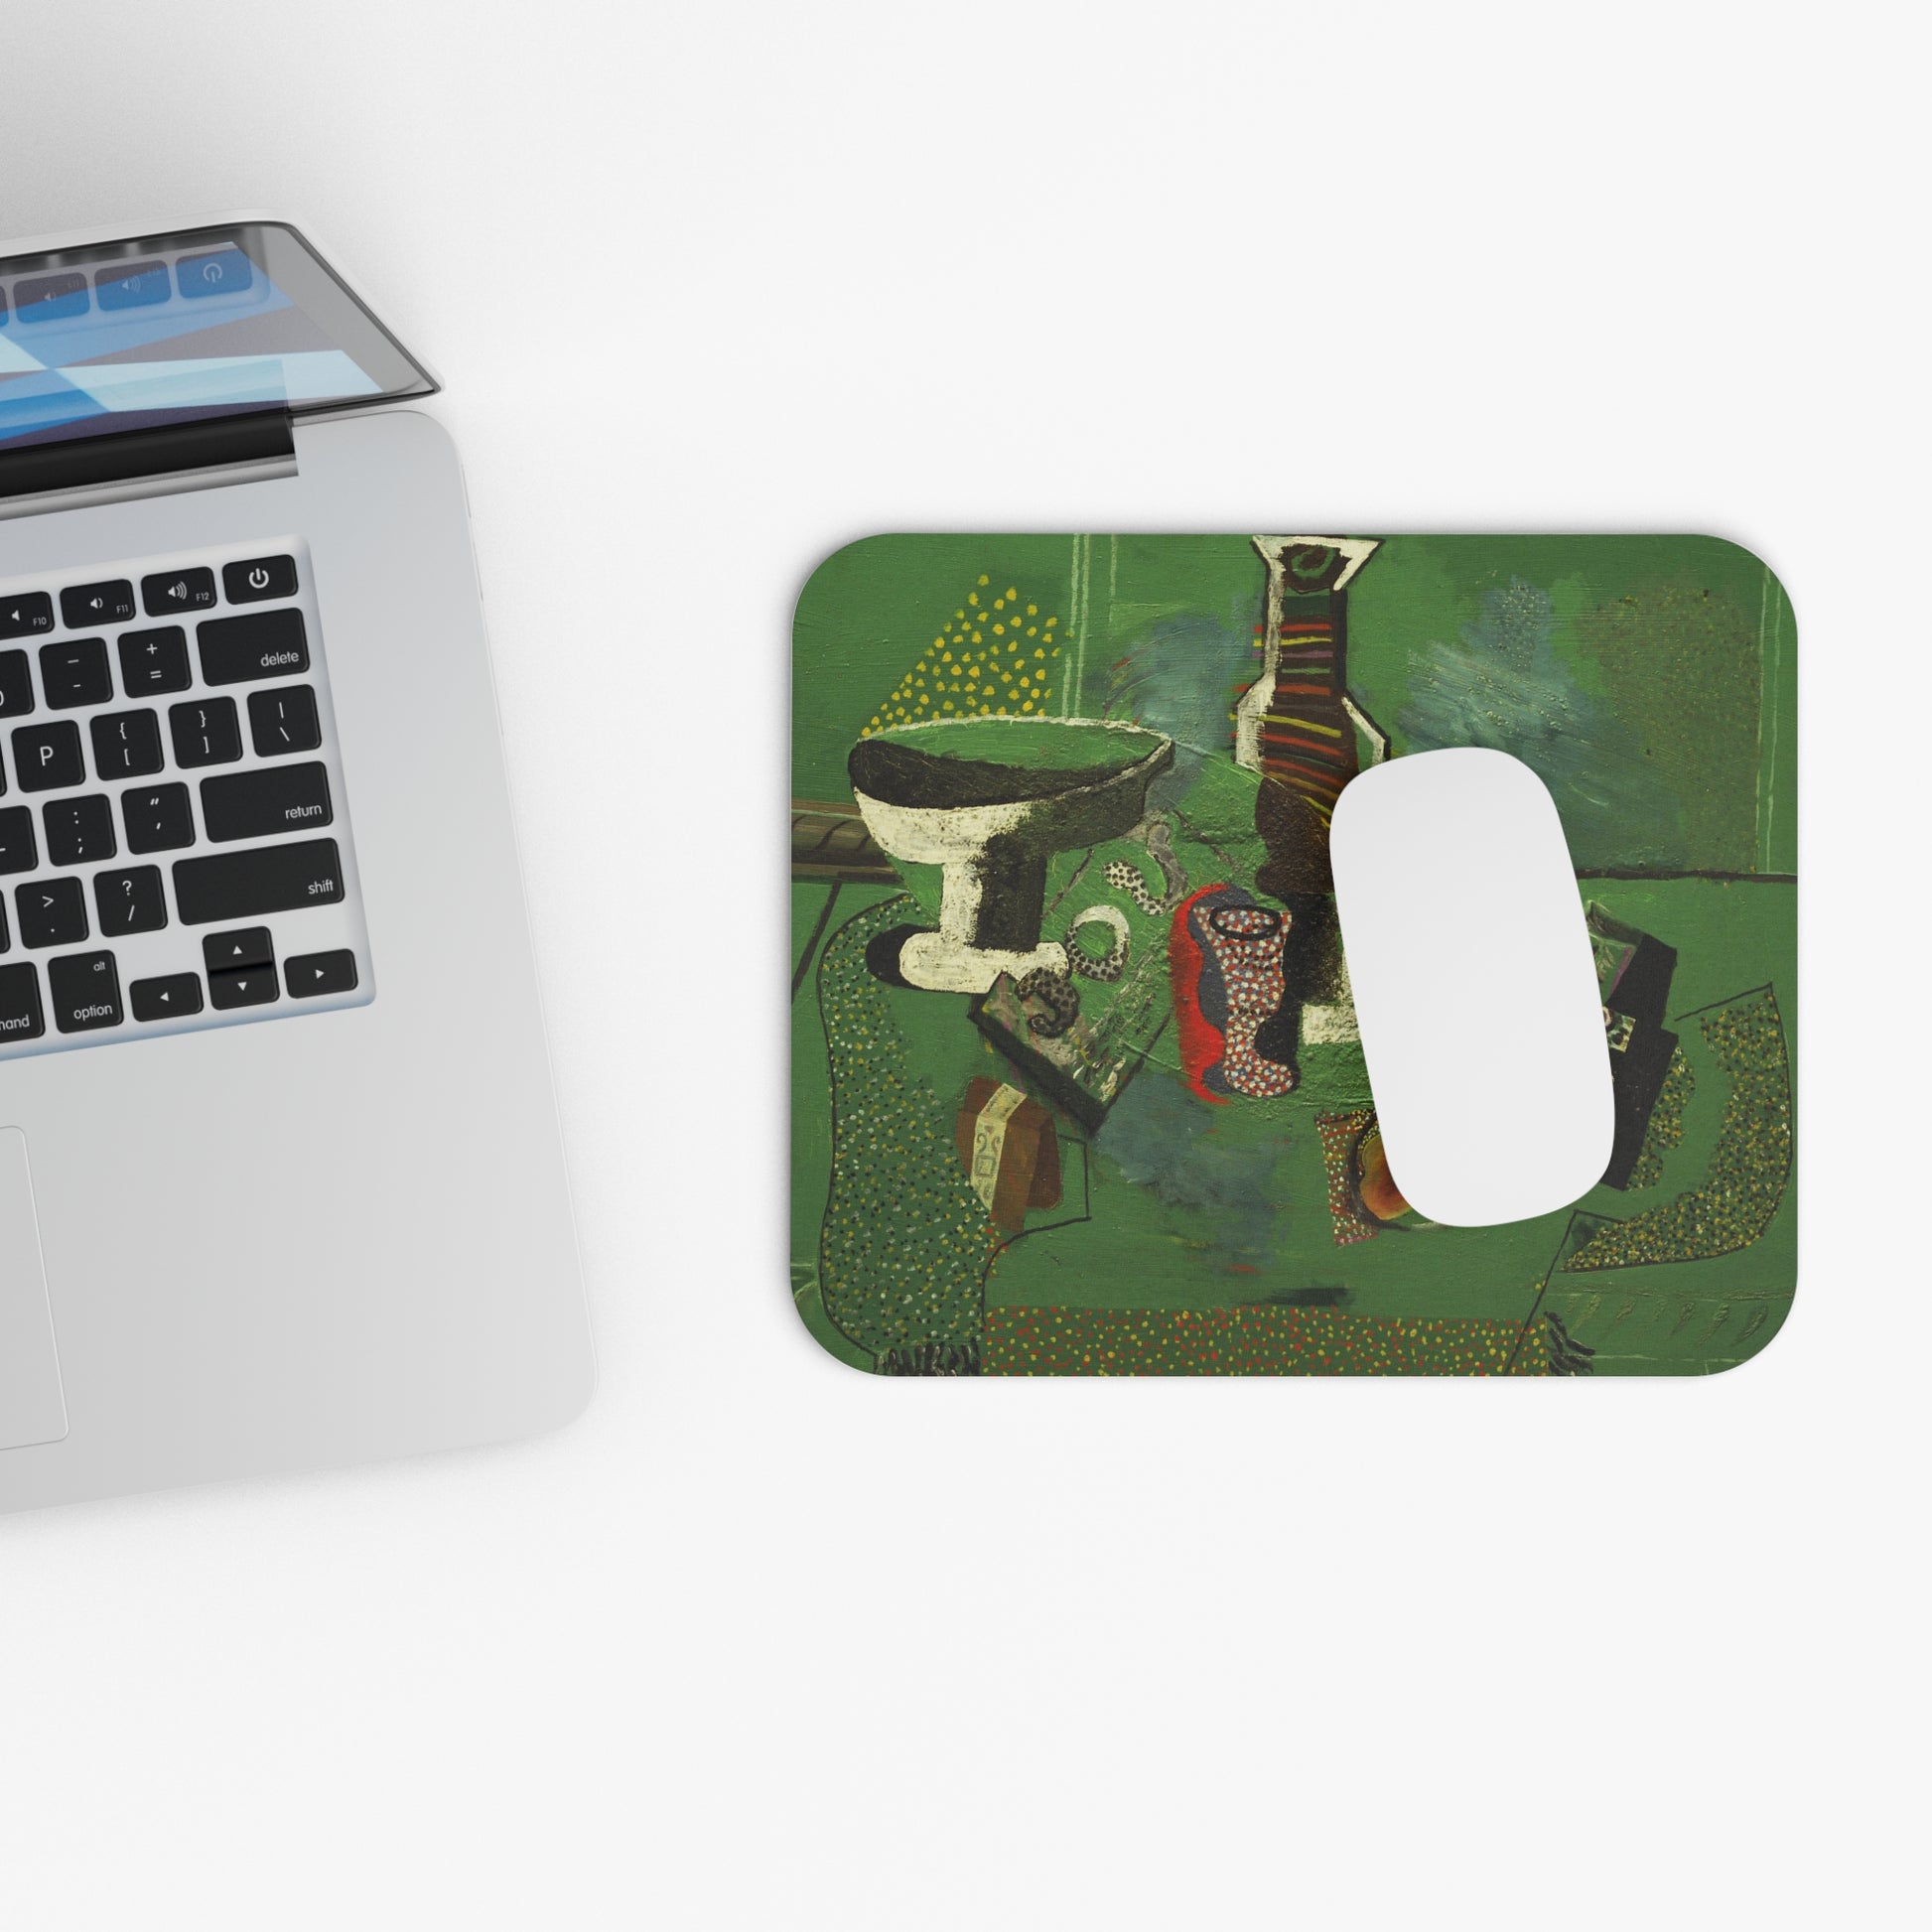 PABLO PICASSO - GREEN STILL LIFE - ART MOUSE PAD